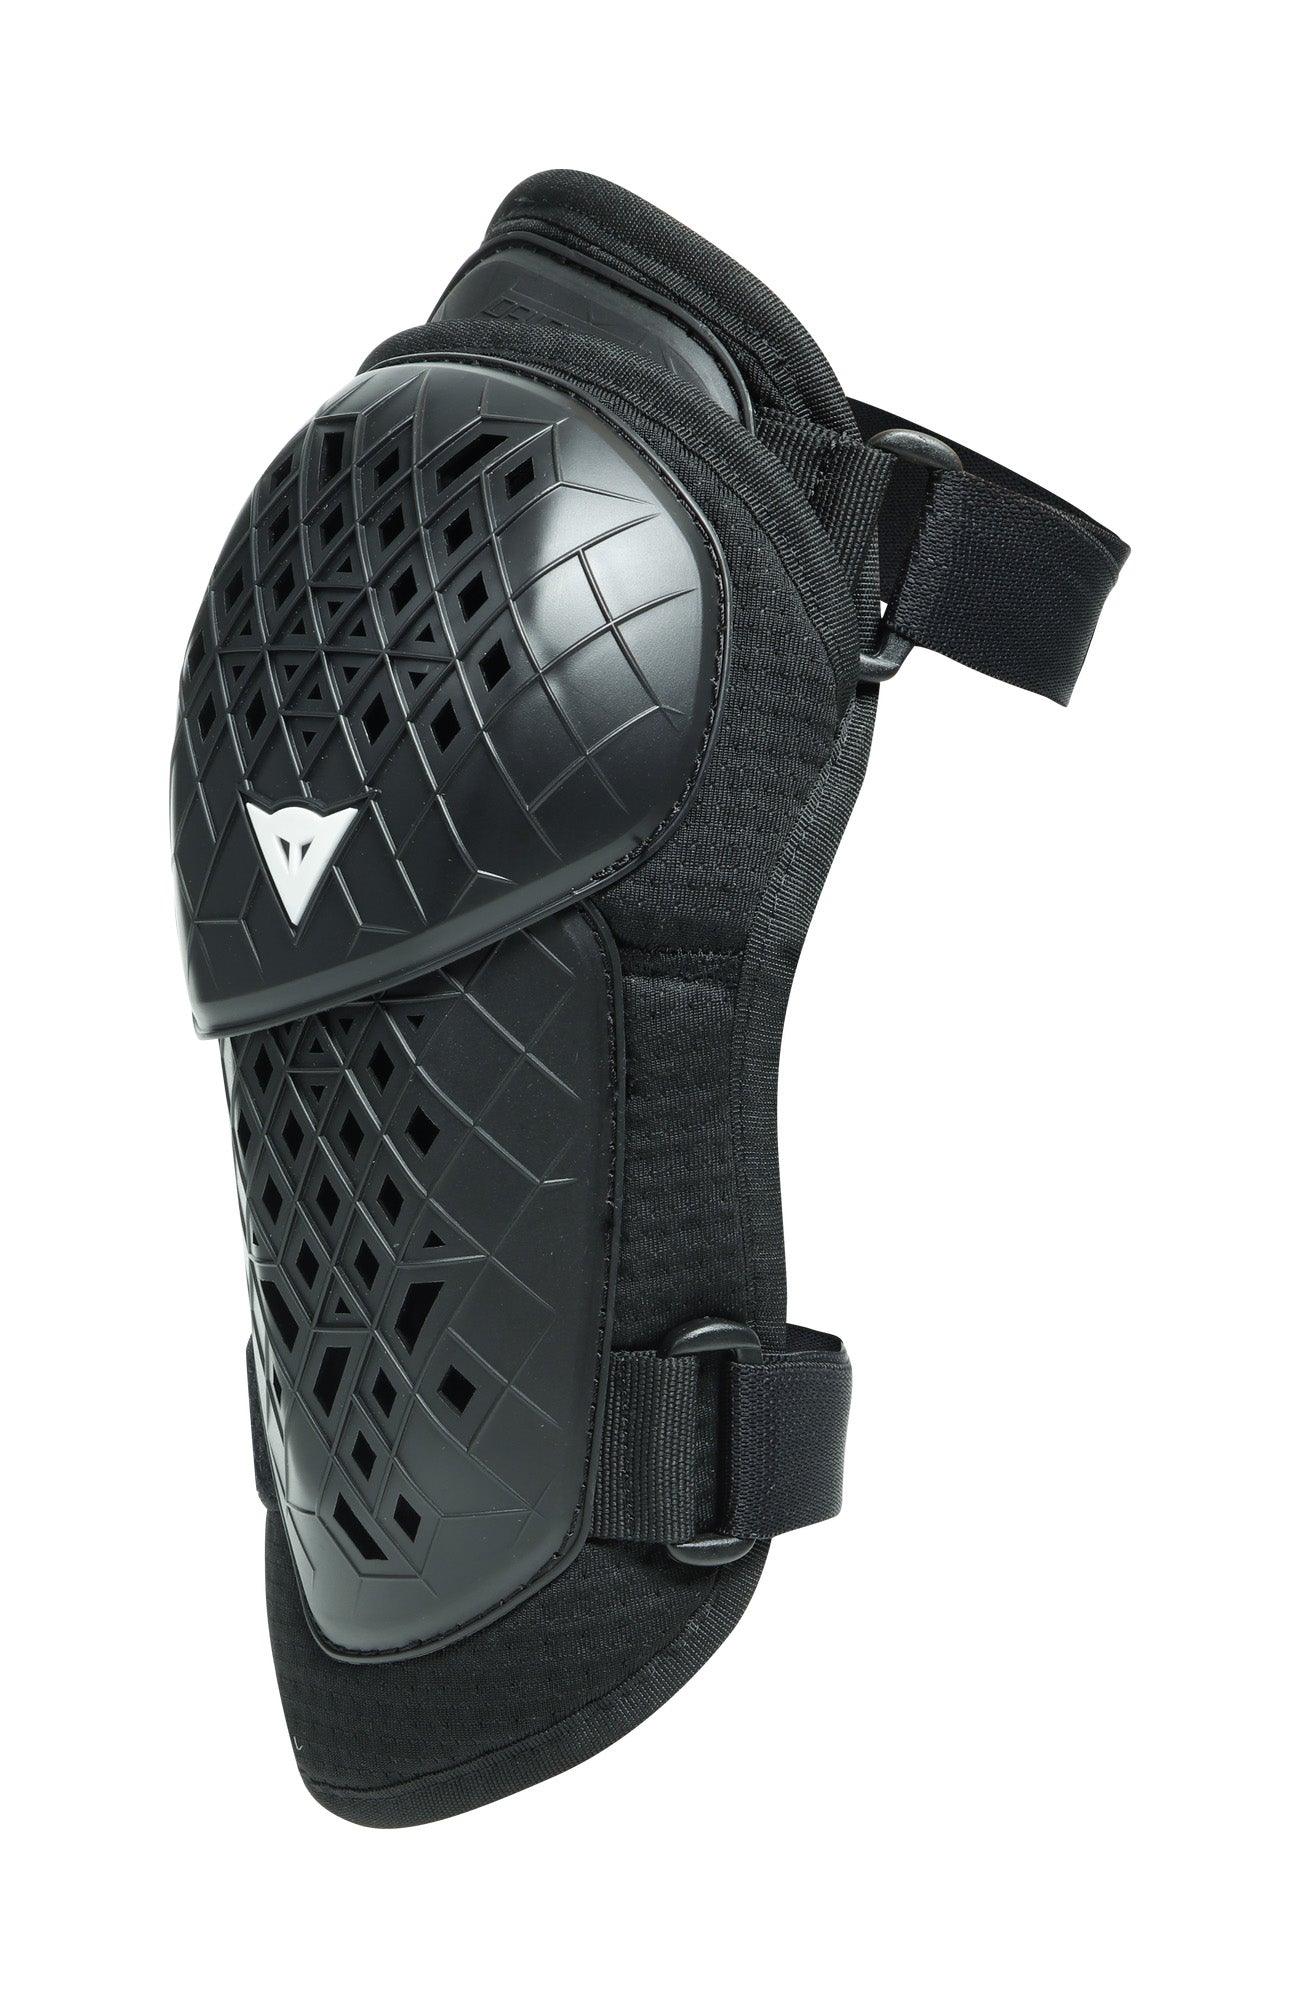 Dainese Rival Elbow Guards R - Sprocket & Gear